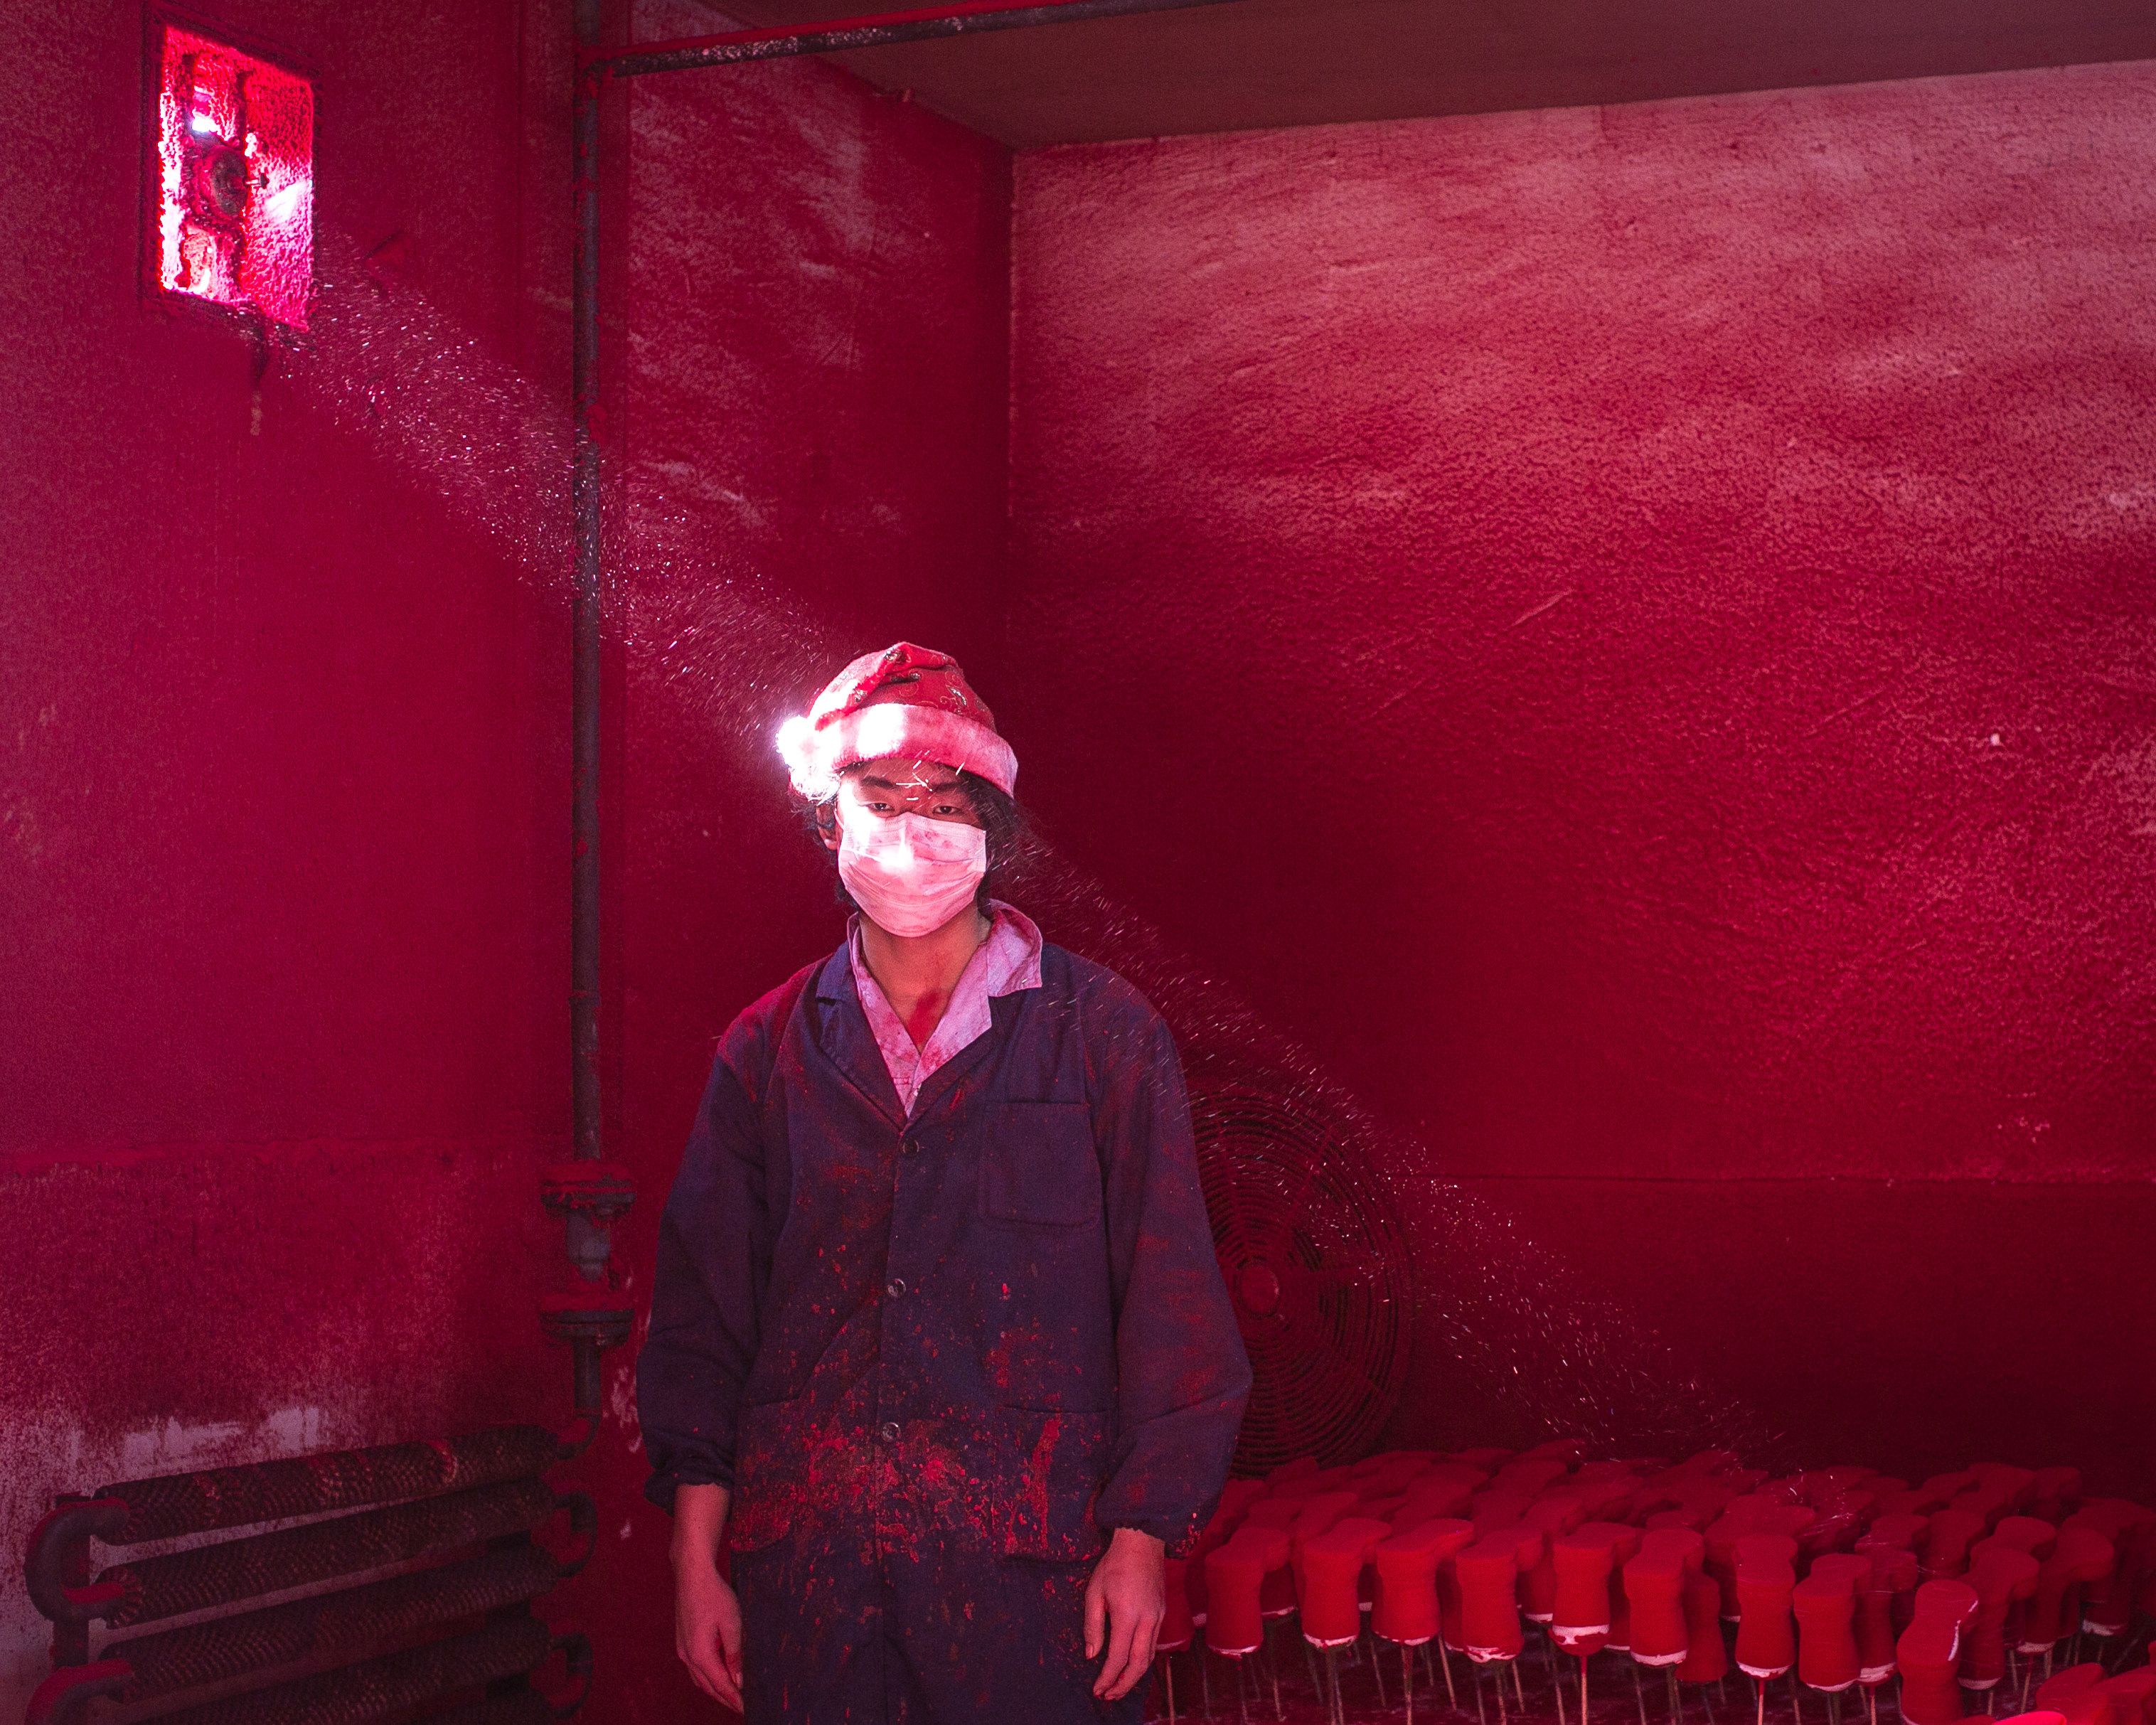 —ONE TIME USE ONLY NO SALES—&#xA;&#xA;On December 6, 2014, at the Yiwu Christmas Factory, 19-year-old Xiao Wei wore a Christmas hat and a mask to work in dusty workshop. He typically goES through six masks per day.&#xA;&#xA;Credit: Chen Ronghui